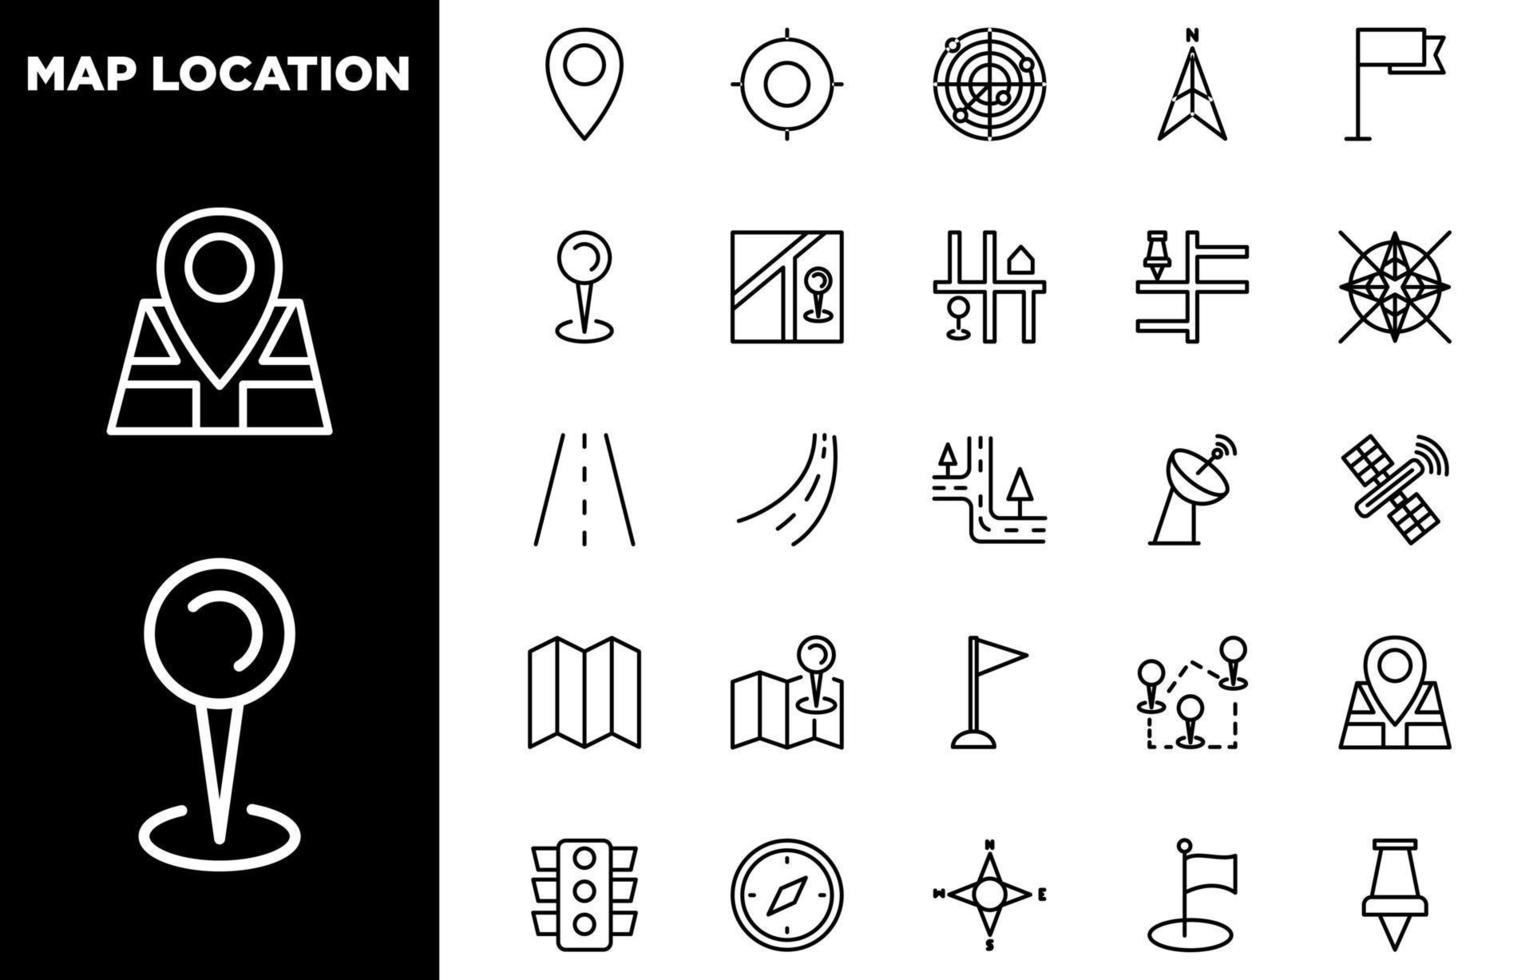 Map and location icon set vector element for your design